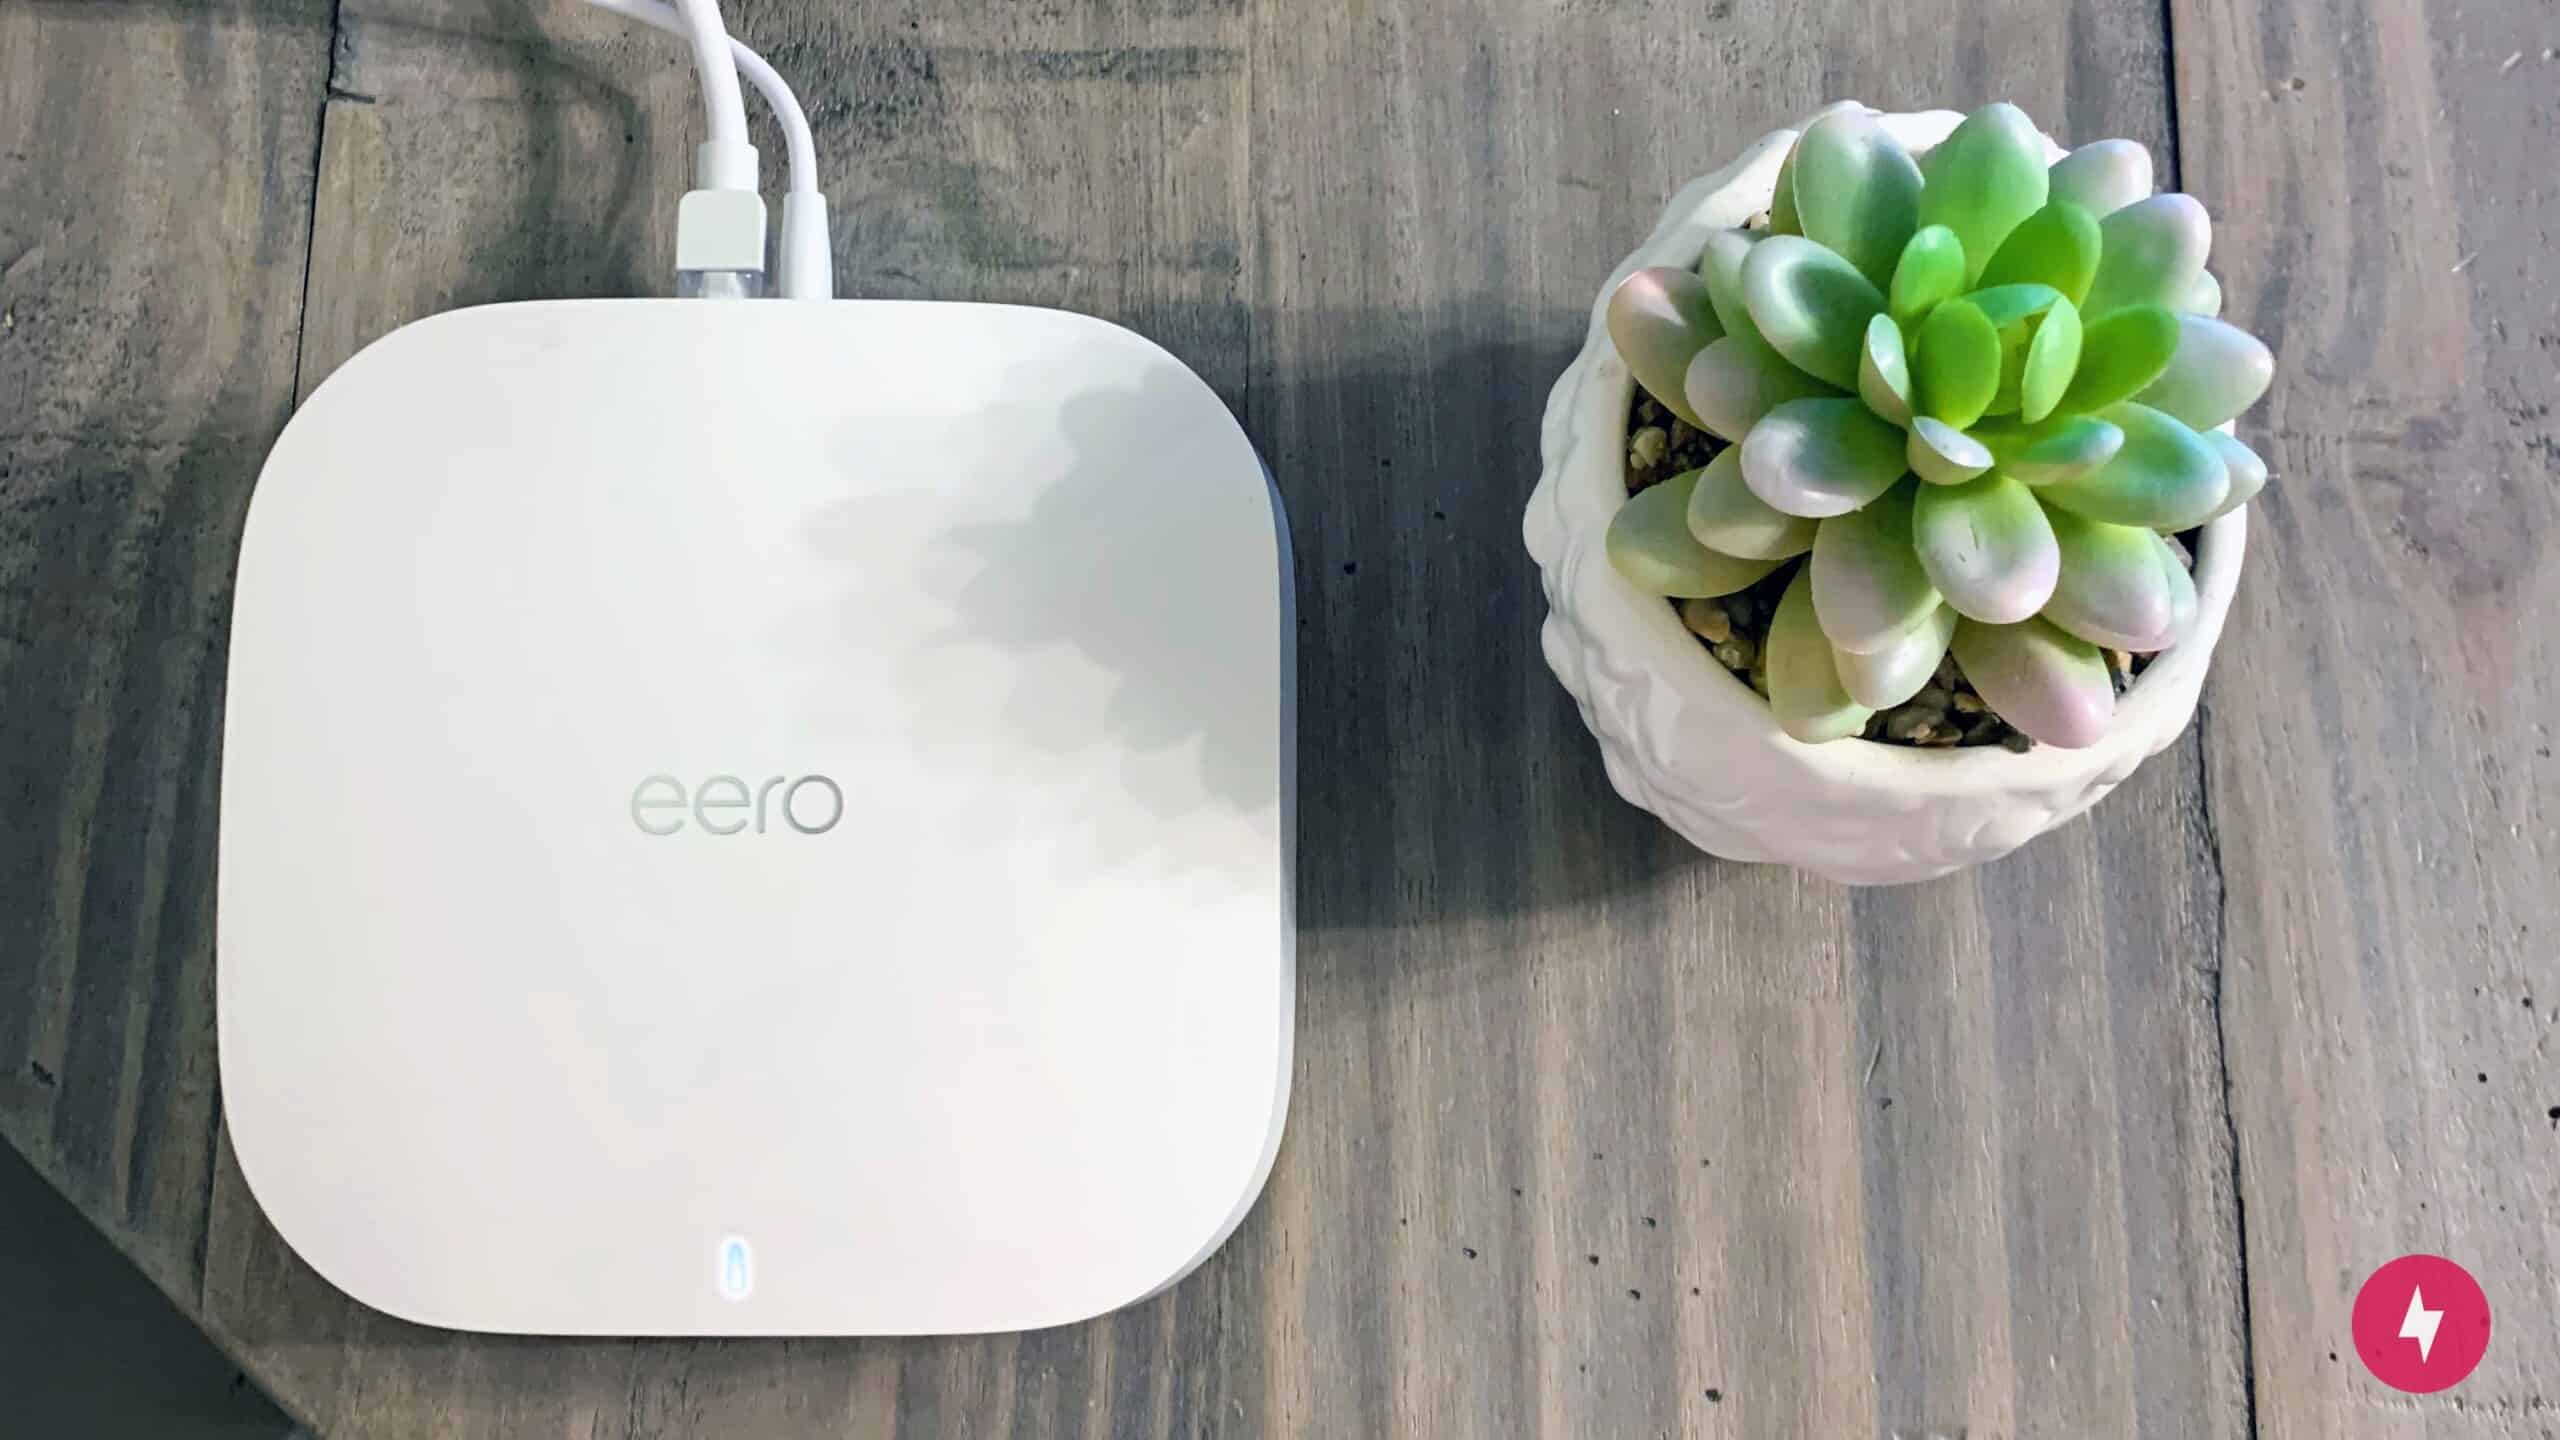 An eero Pro 6 device sitting next to a succulent plant on a TV stand.